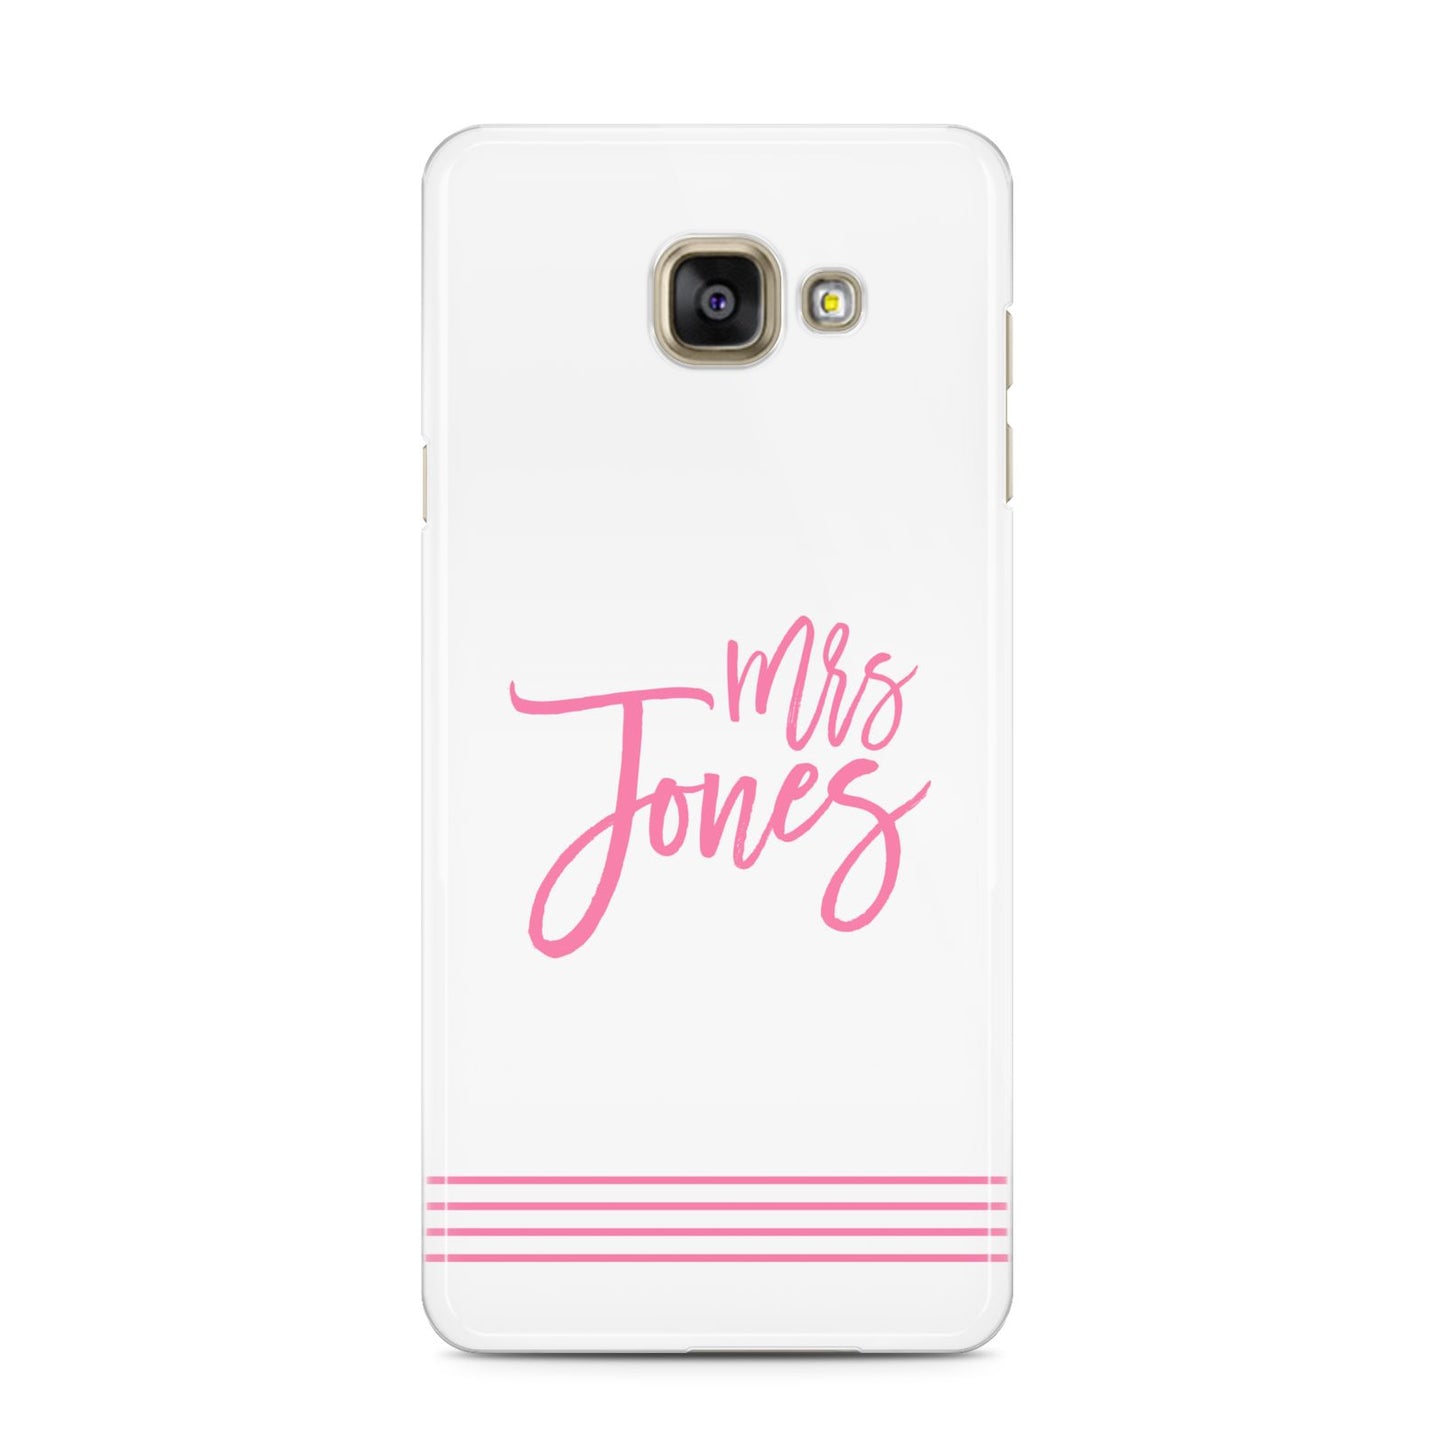 Personalised Hers Samsung Galaxy A3 2016 Case on gold phone